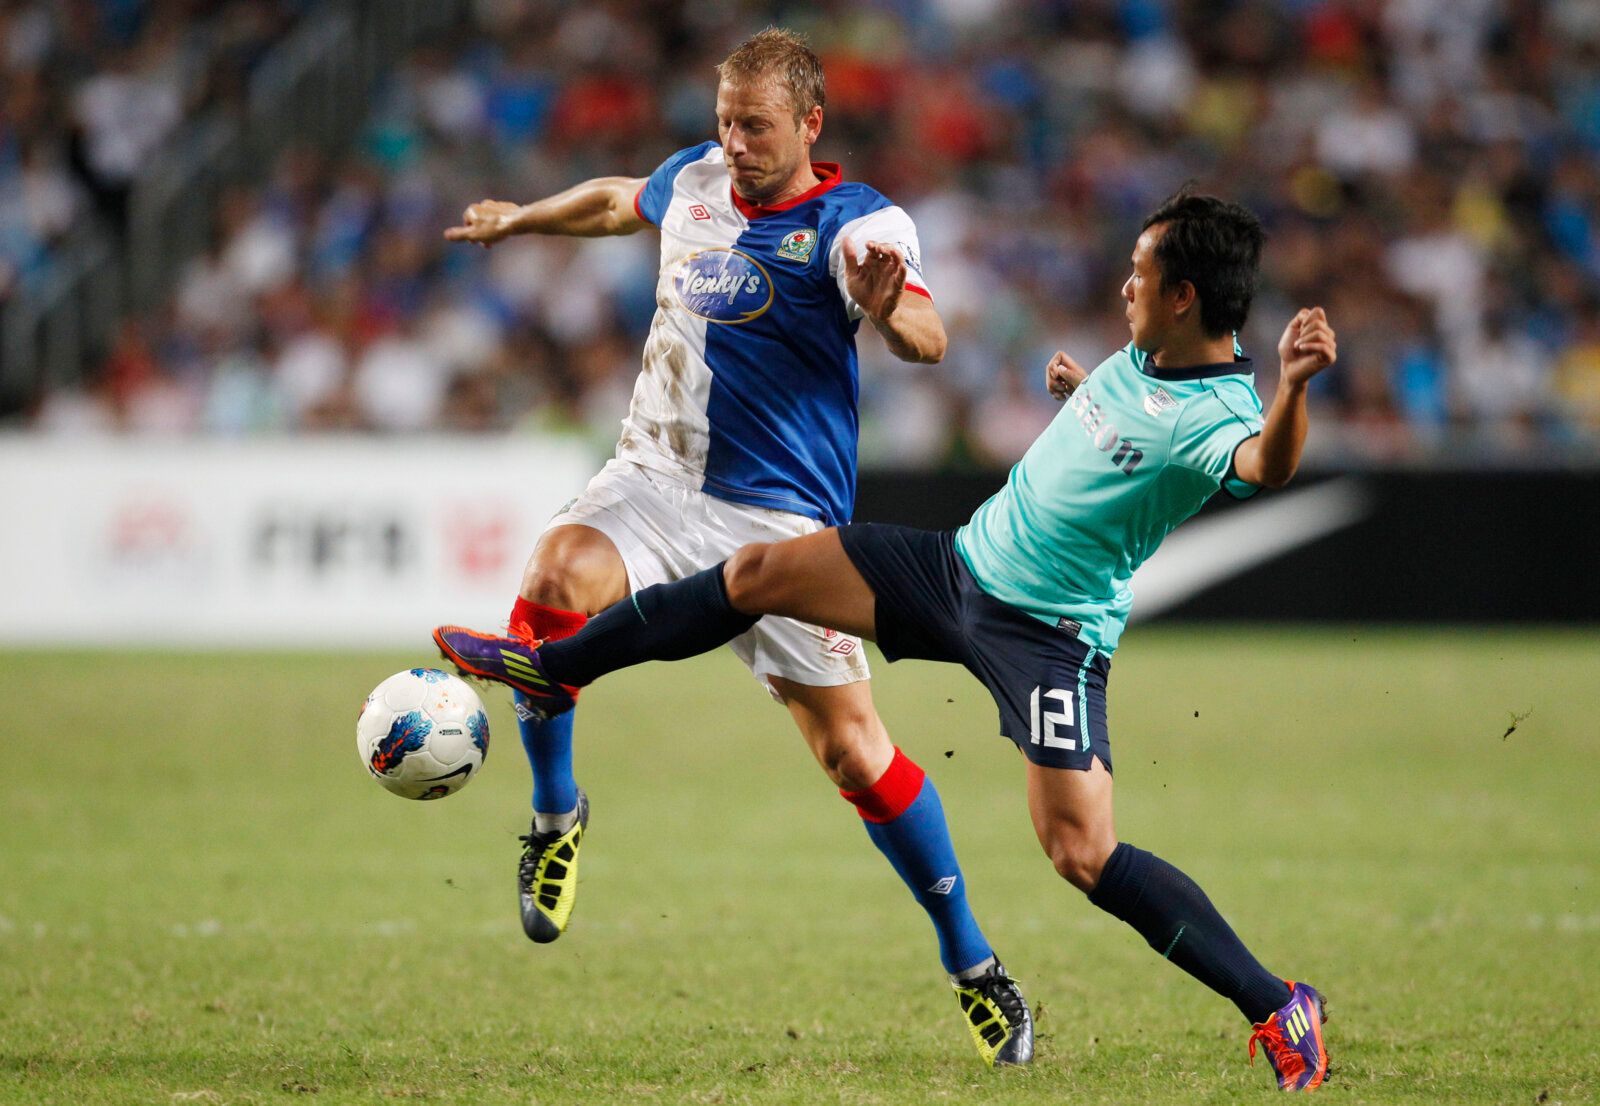 Football - Kitchee v Blackburn Rovers Barclays Asia Trophy Third/Fourth Place Play-Off - Hong Kong 2011  - The Hong Kong Stadium - 30/7/11 
Blackburn Rovers' Vince Grella and Kitchee's Lo Kwan Yee (R) in action 
Mandatory Credit: Action Images / John Sibley 
Livepic